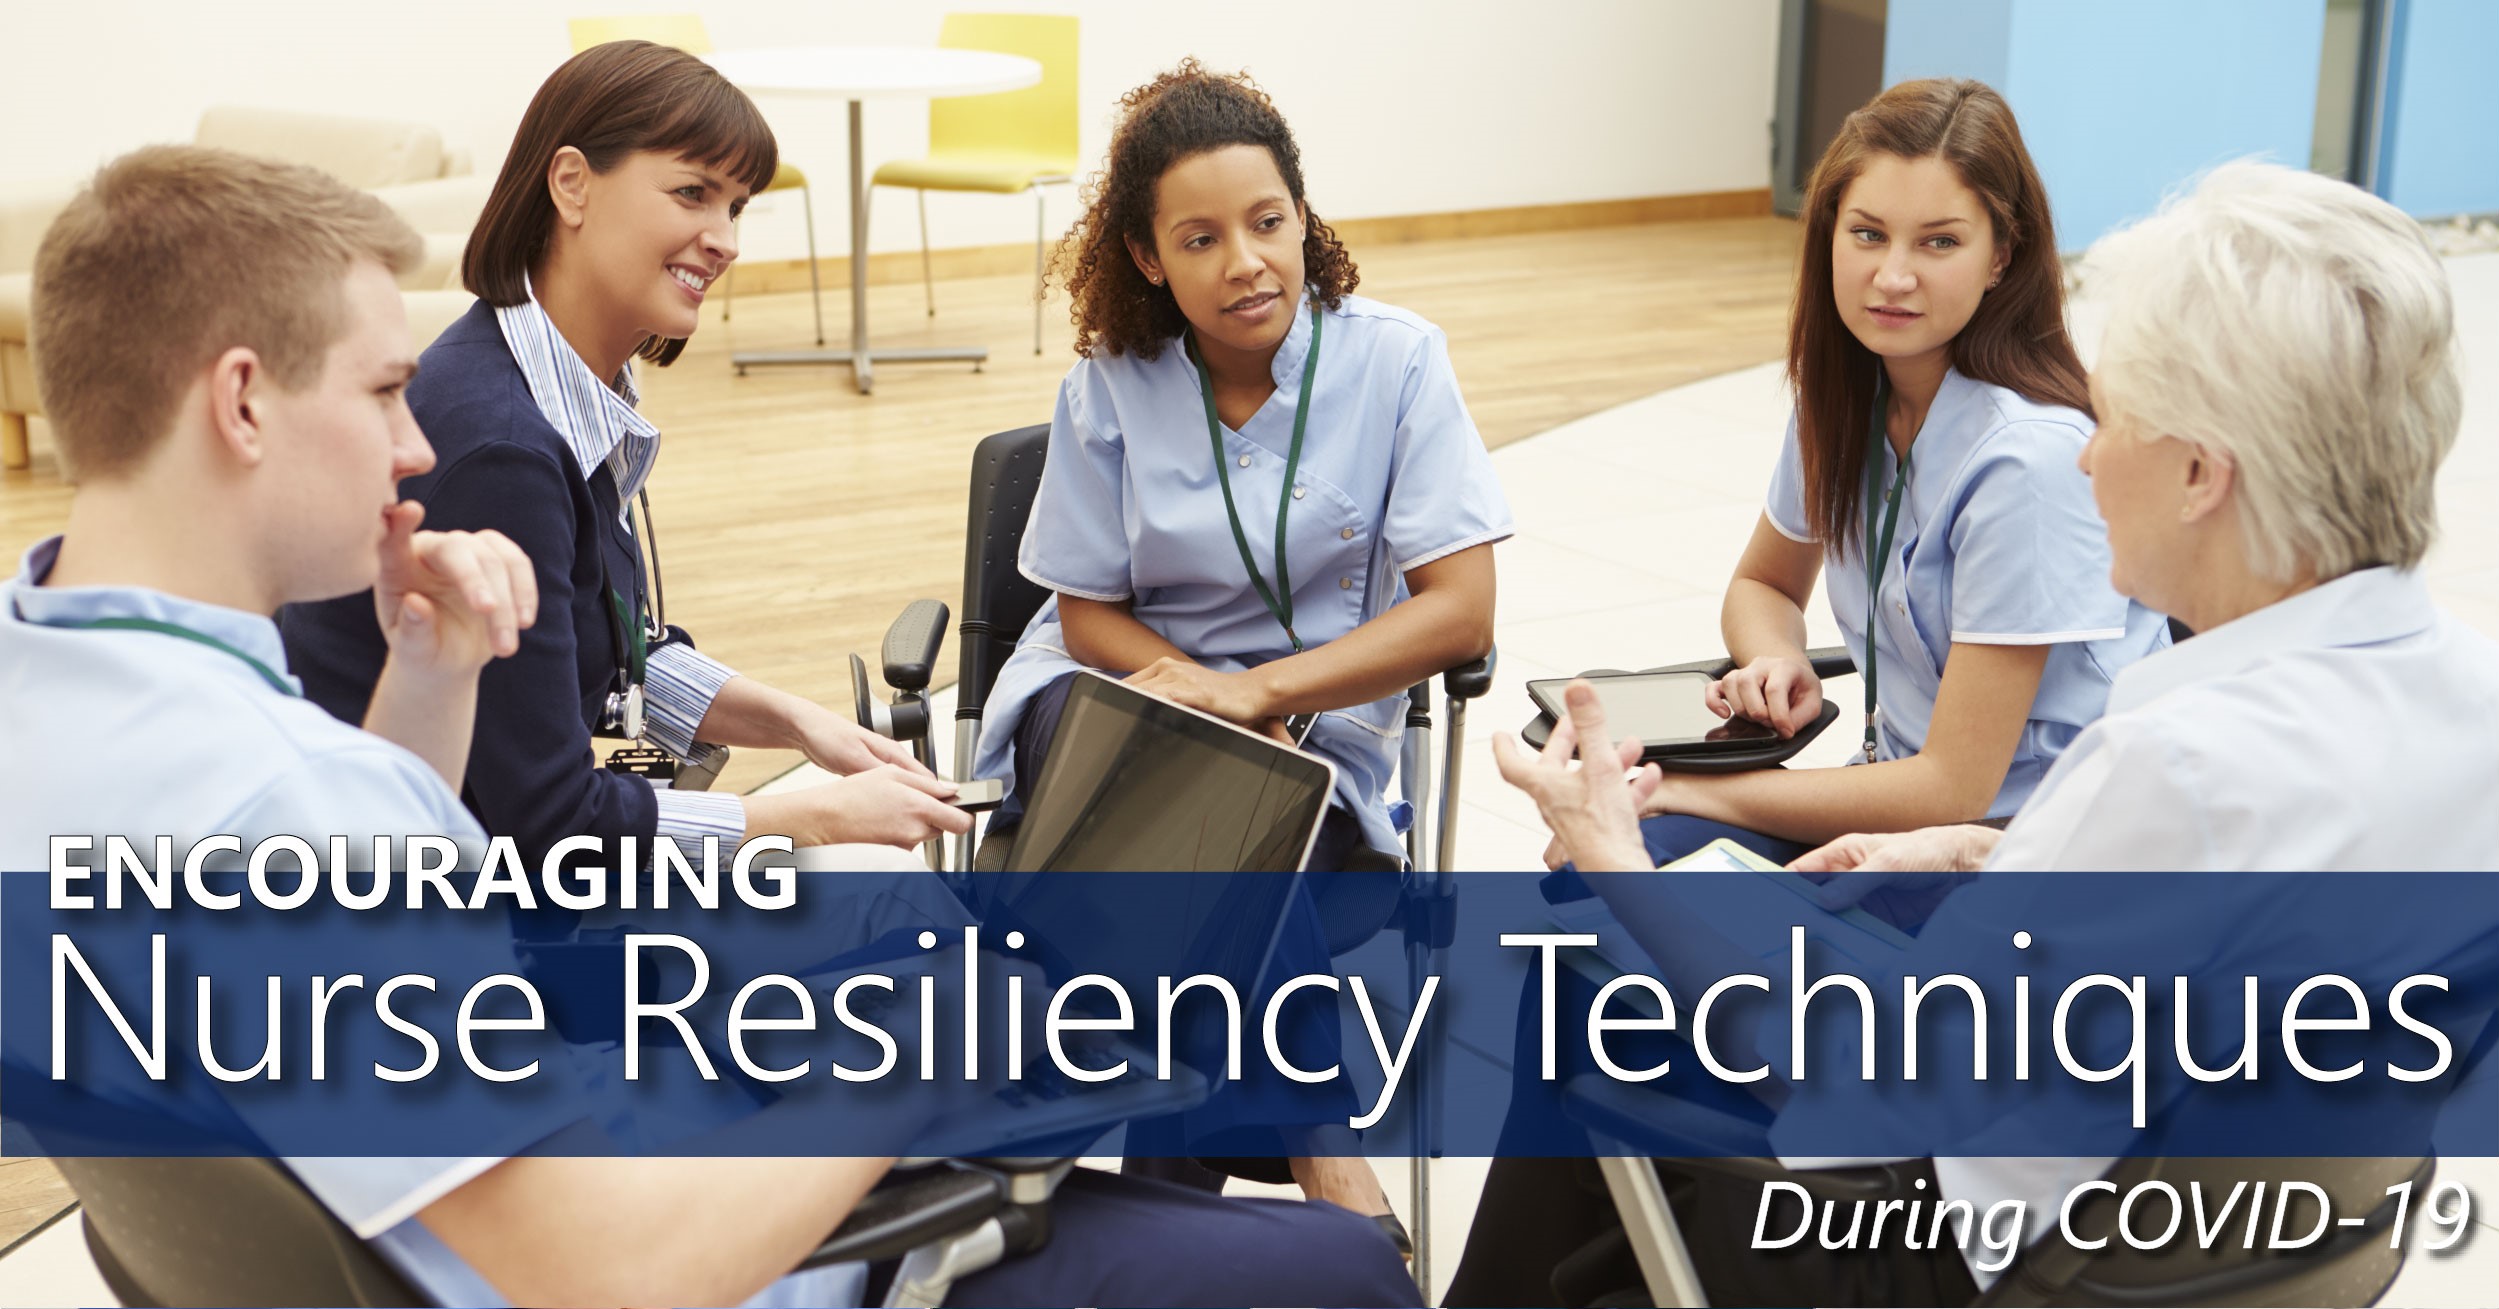 Encouraging Nurse Resiliency Techniques During COVID-19